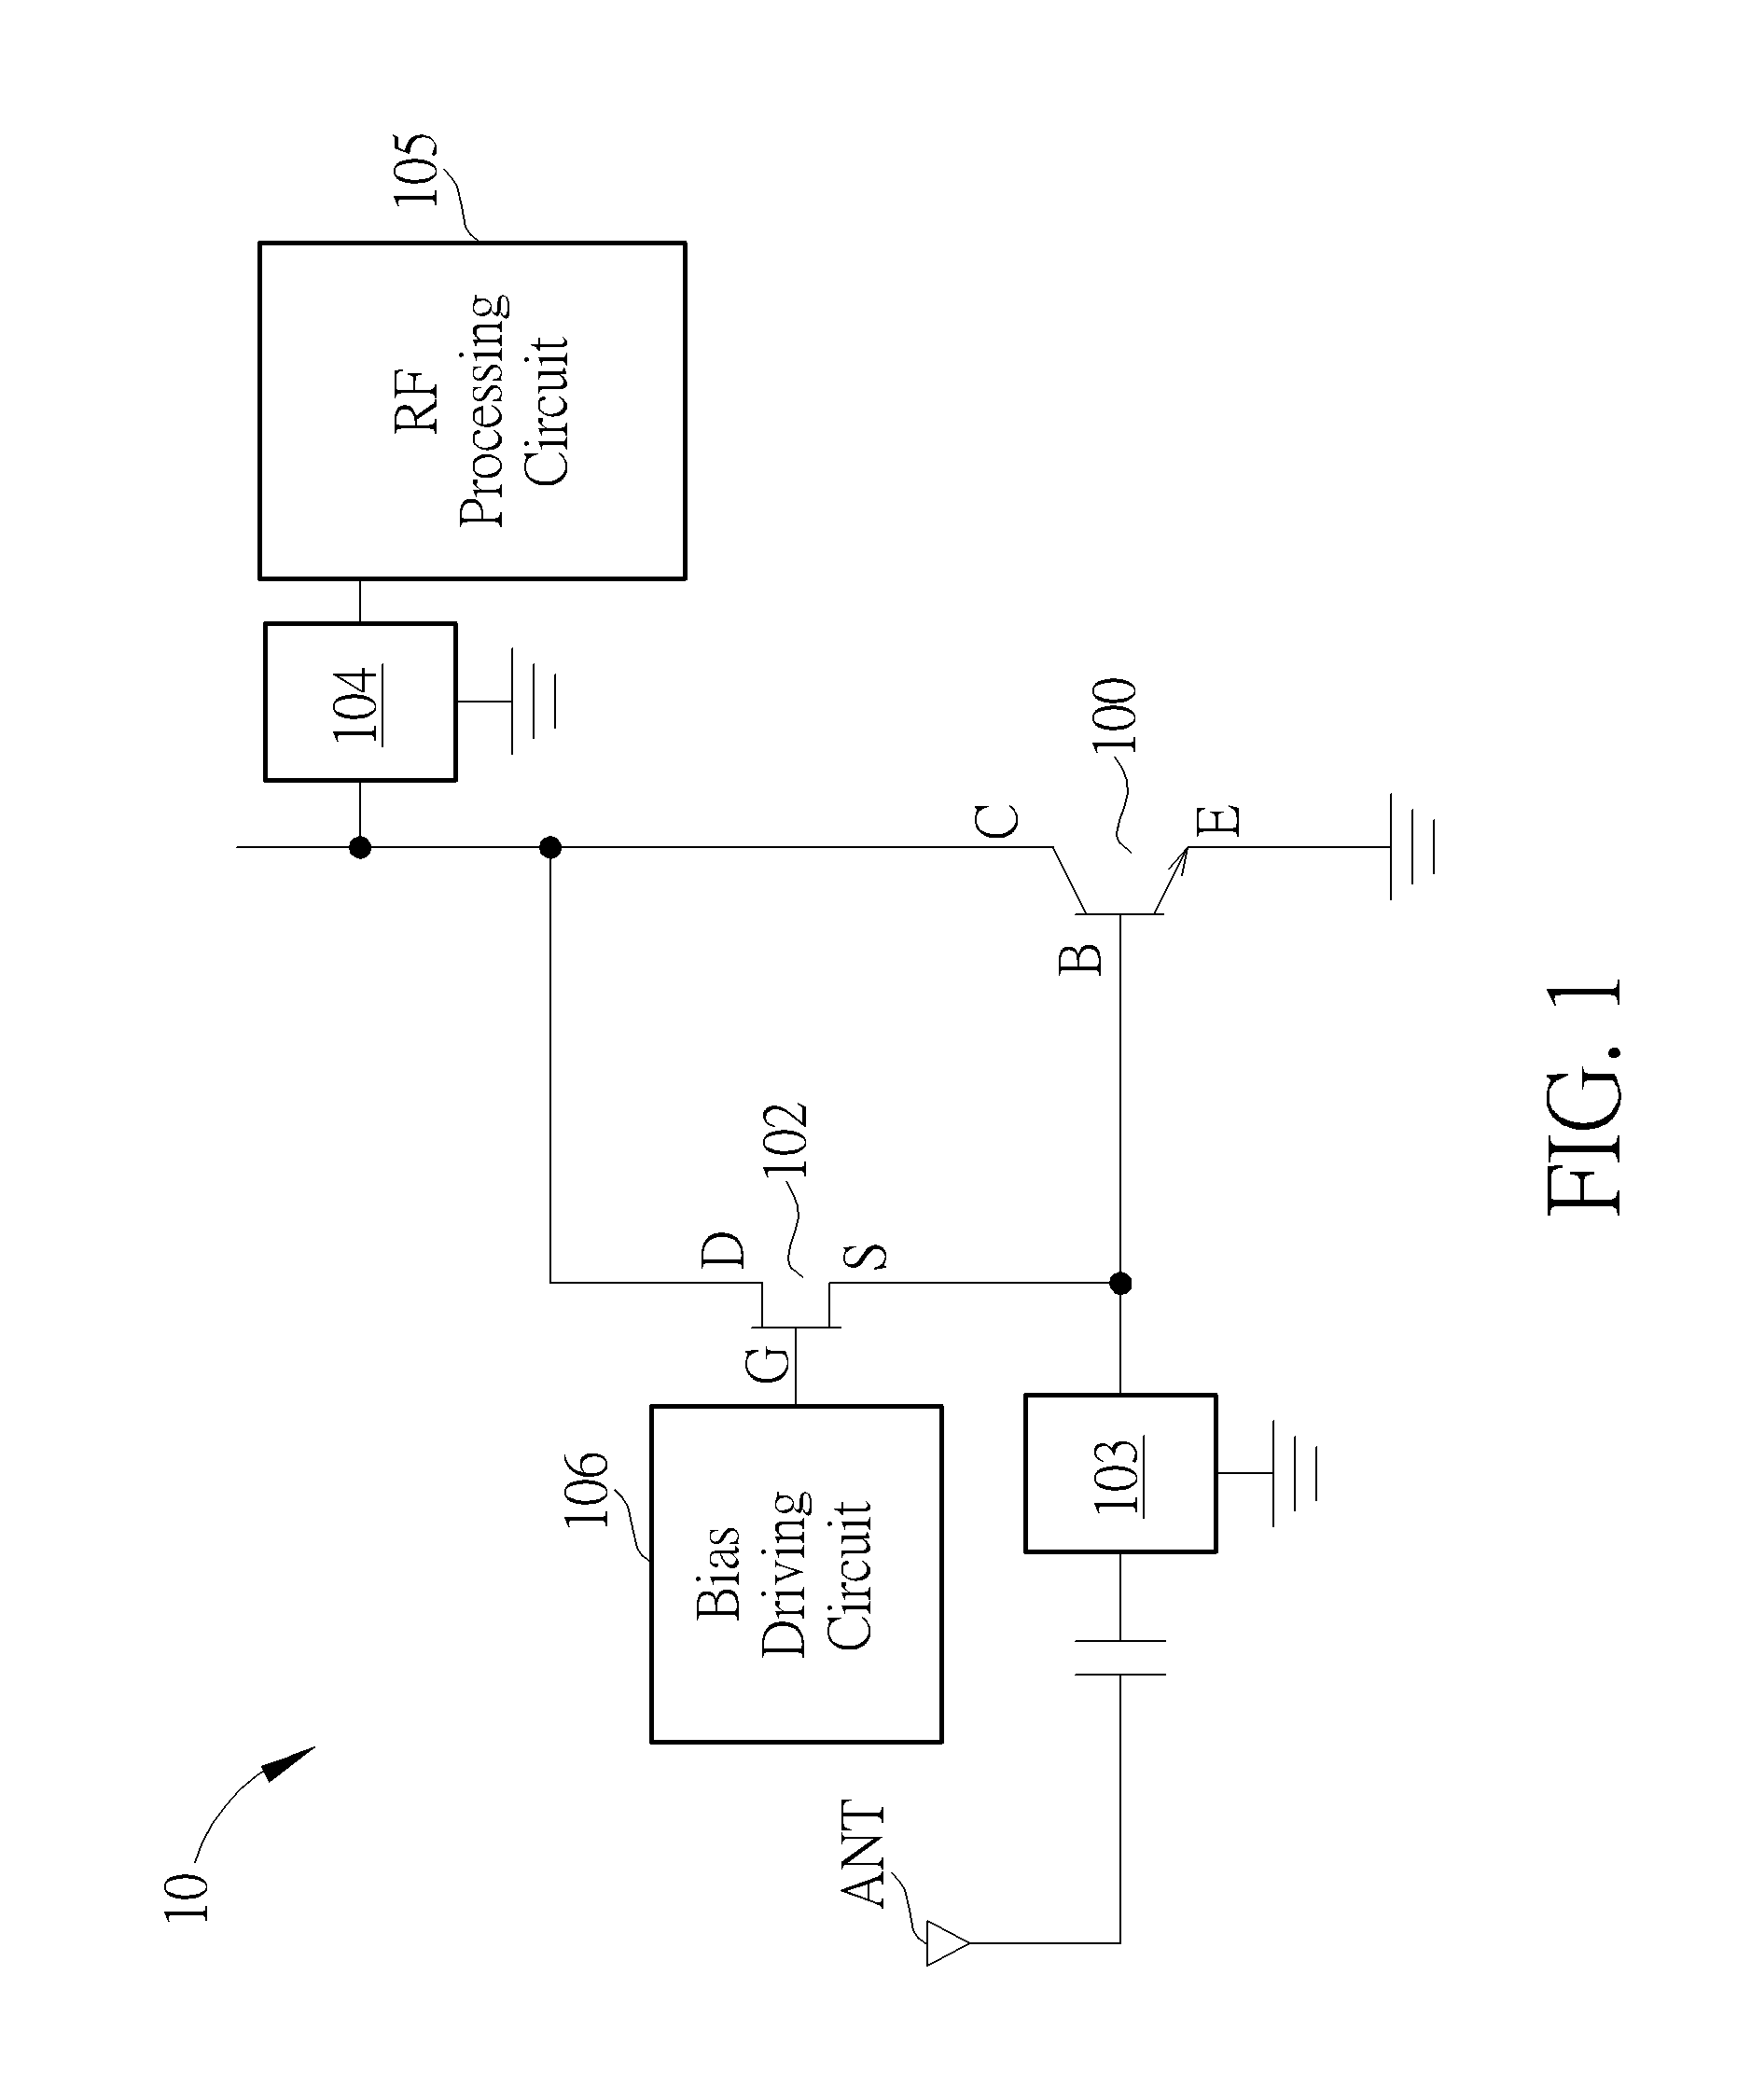 Low Noise Amplifier With Noise And Linearity Improvement